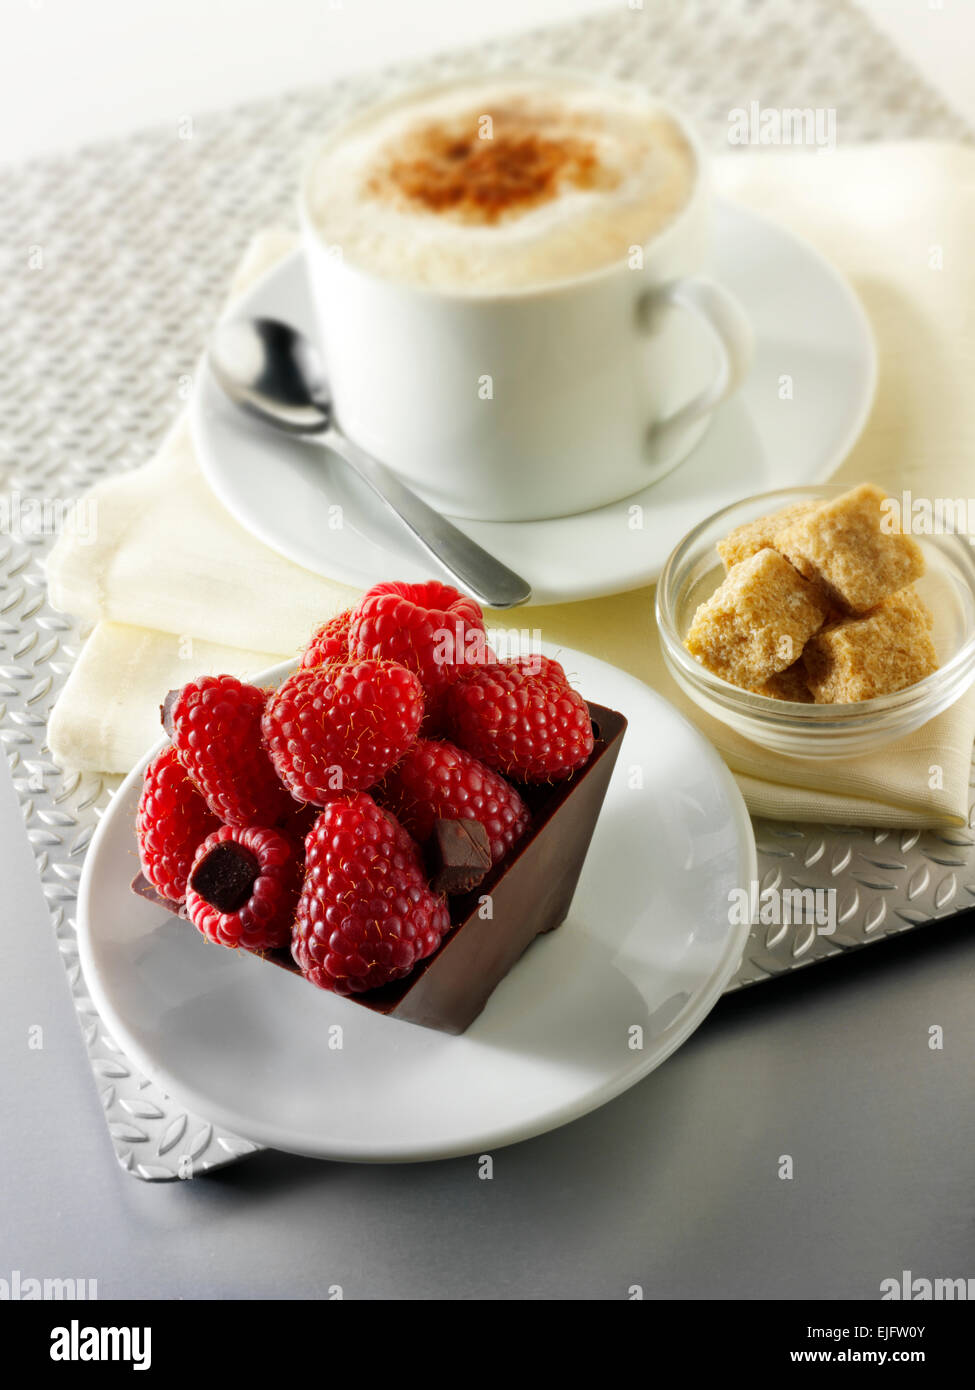 A hand made patisserie speciality rich indulgent chocolate case cake filled with fresh raspberries with coffee in a white table setting Stock Photo